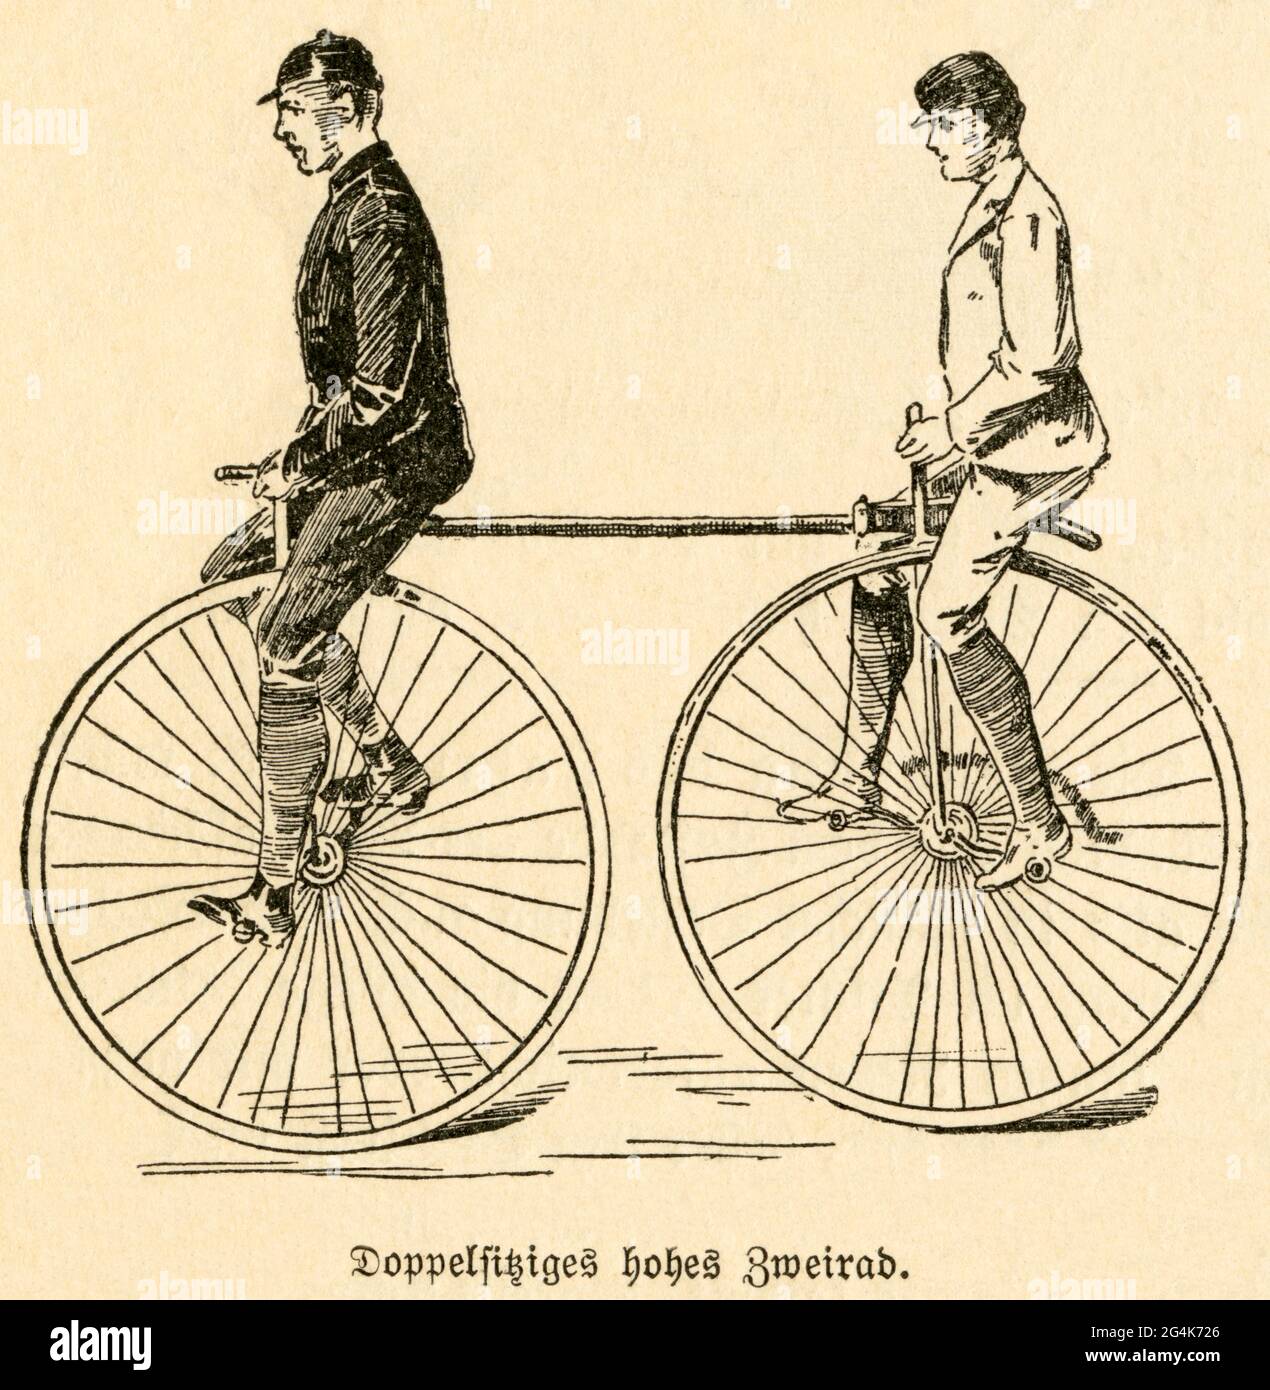 Germany, history of bicycles, high wheeler, ADDITIONAL-RIGHTS-CLEARANCE-INFO-NOT-AVAILABLE Stock Photo